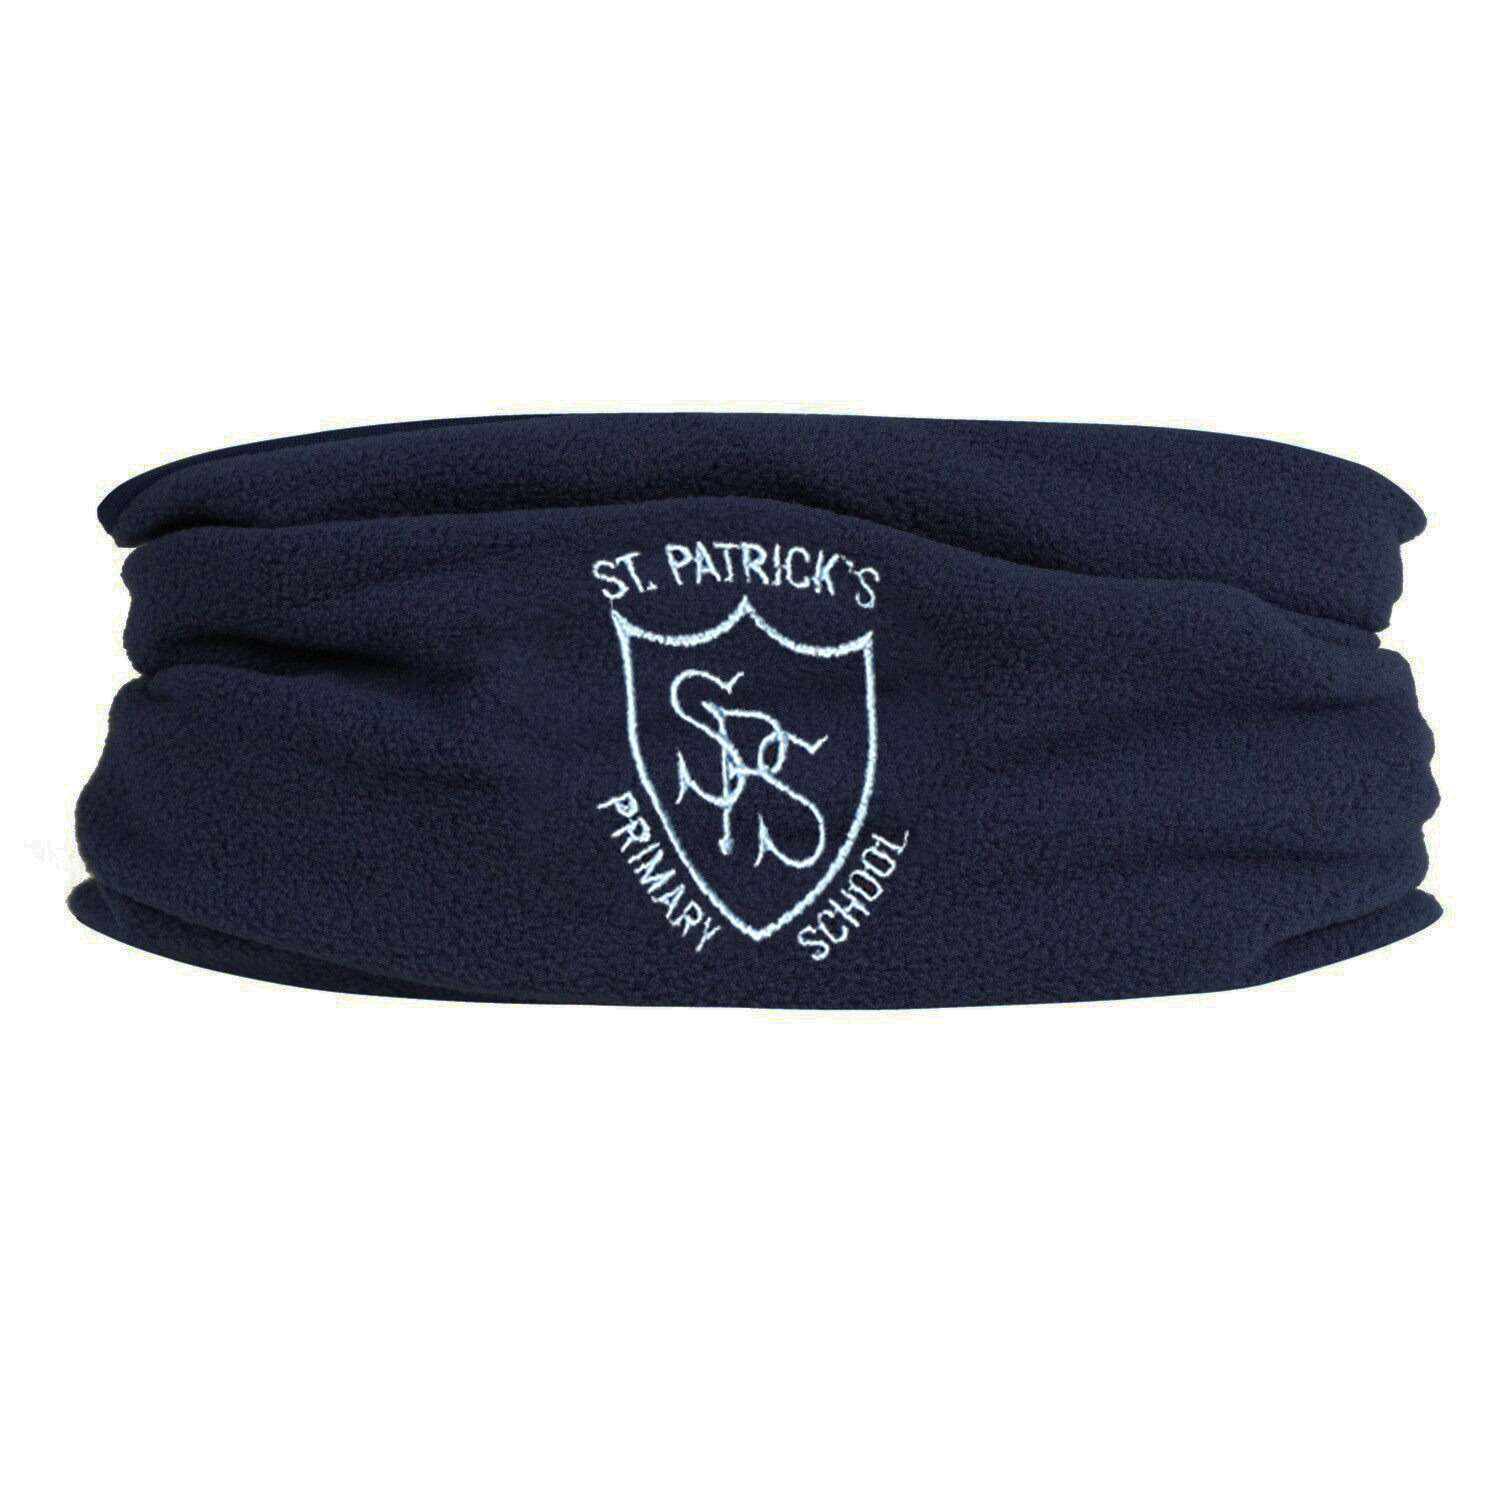 St Patrick's Primary Staff Snood (RCSB920)